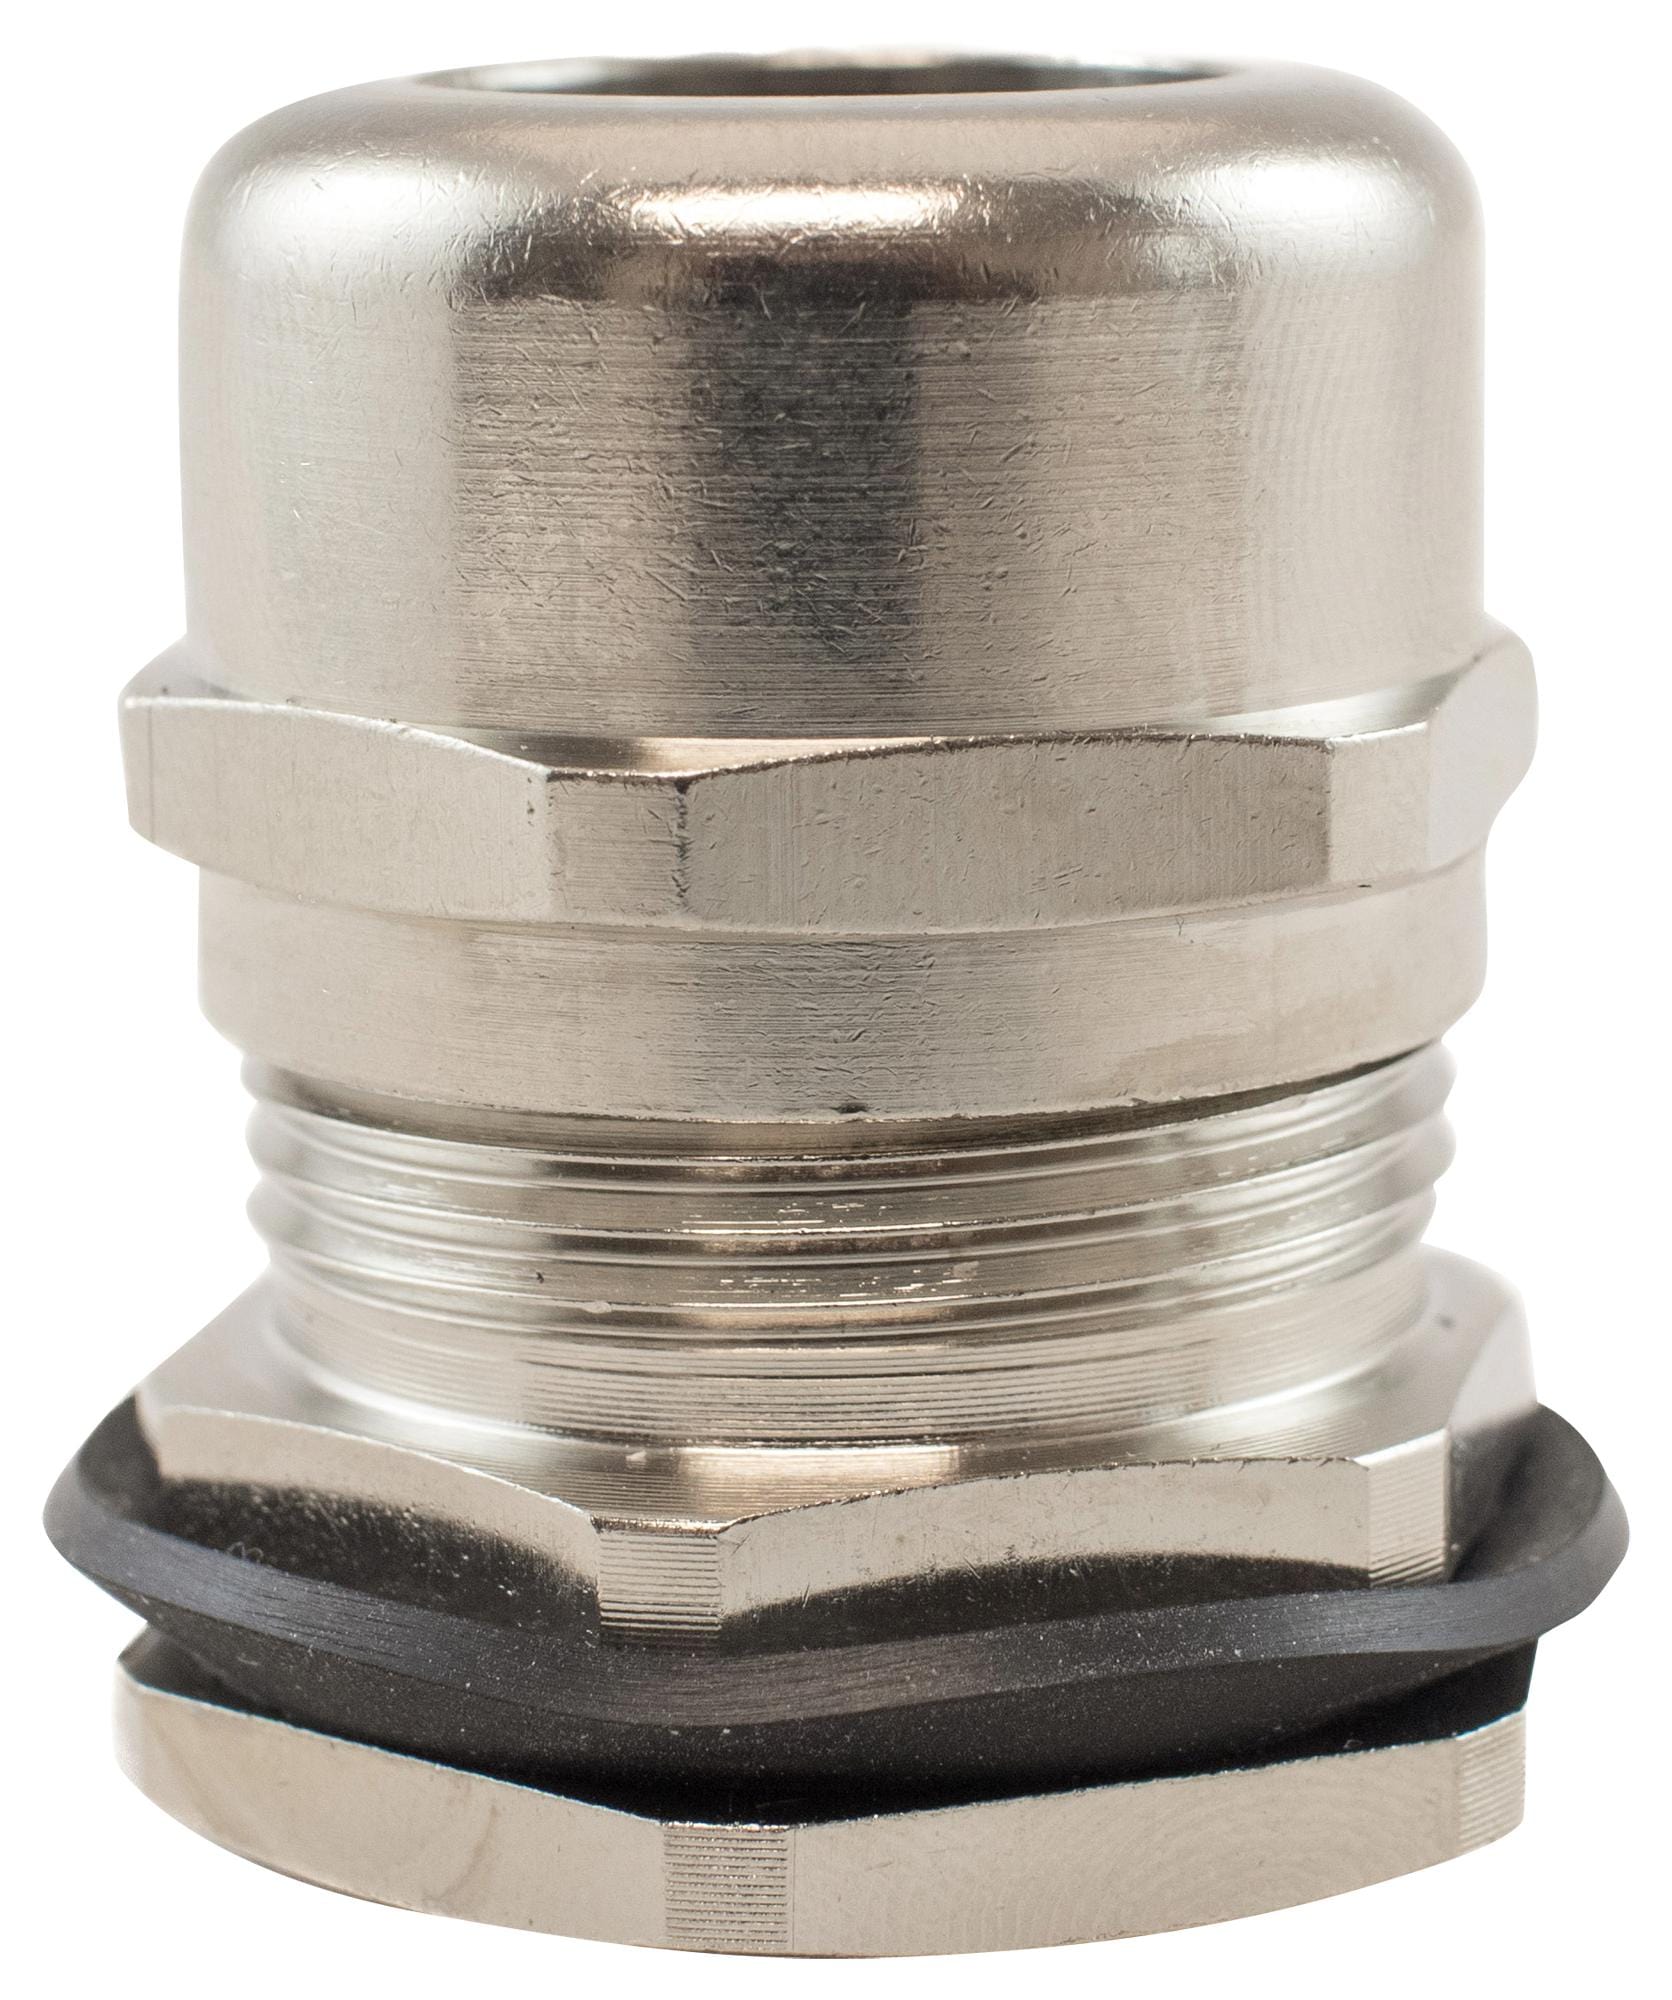 ALPHA WIRE Glands MPG7 NC080 CABLE GLAND, PG7, BRASS, 3-6.5MM ALPHA WIRE 2891966 MPG7 NC080